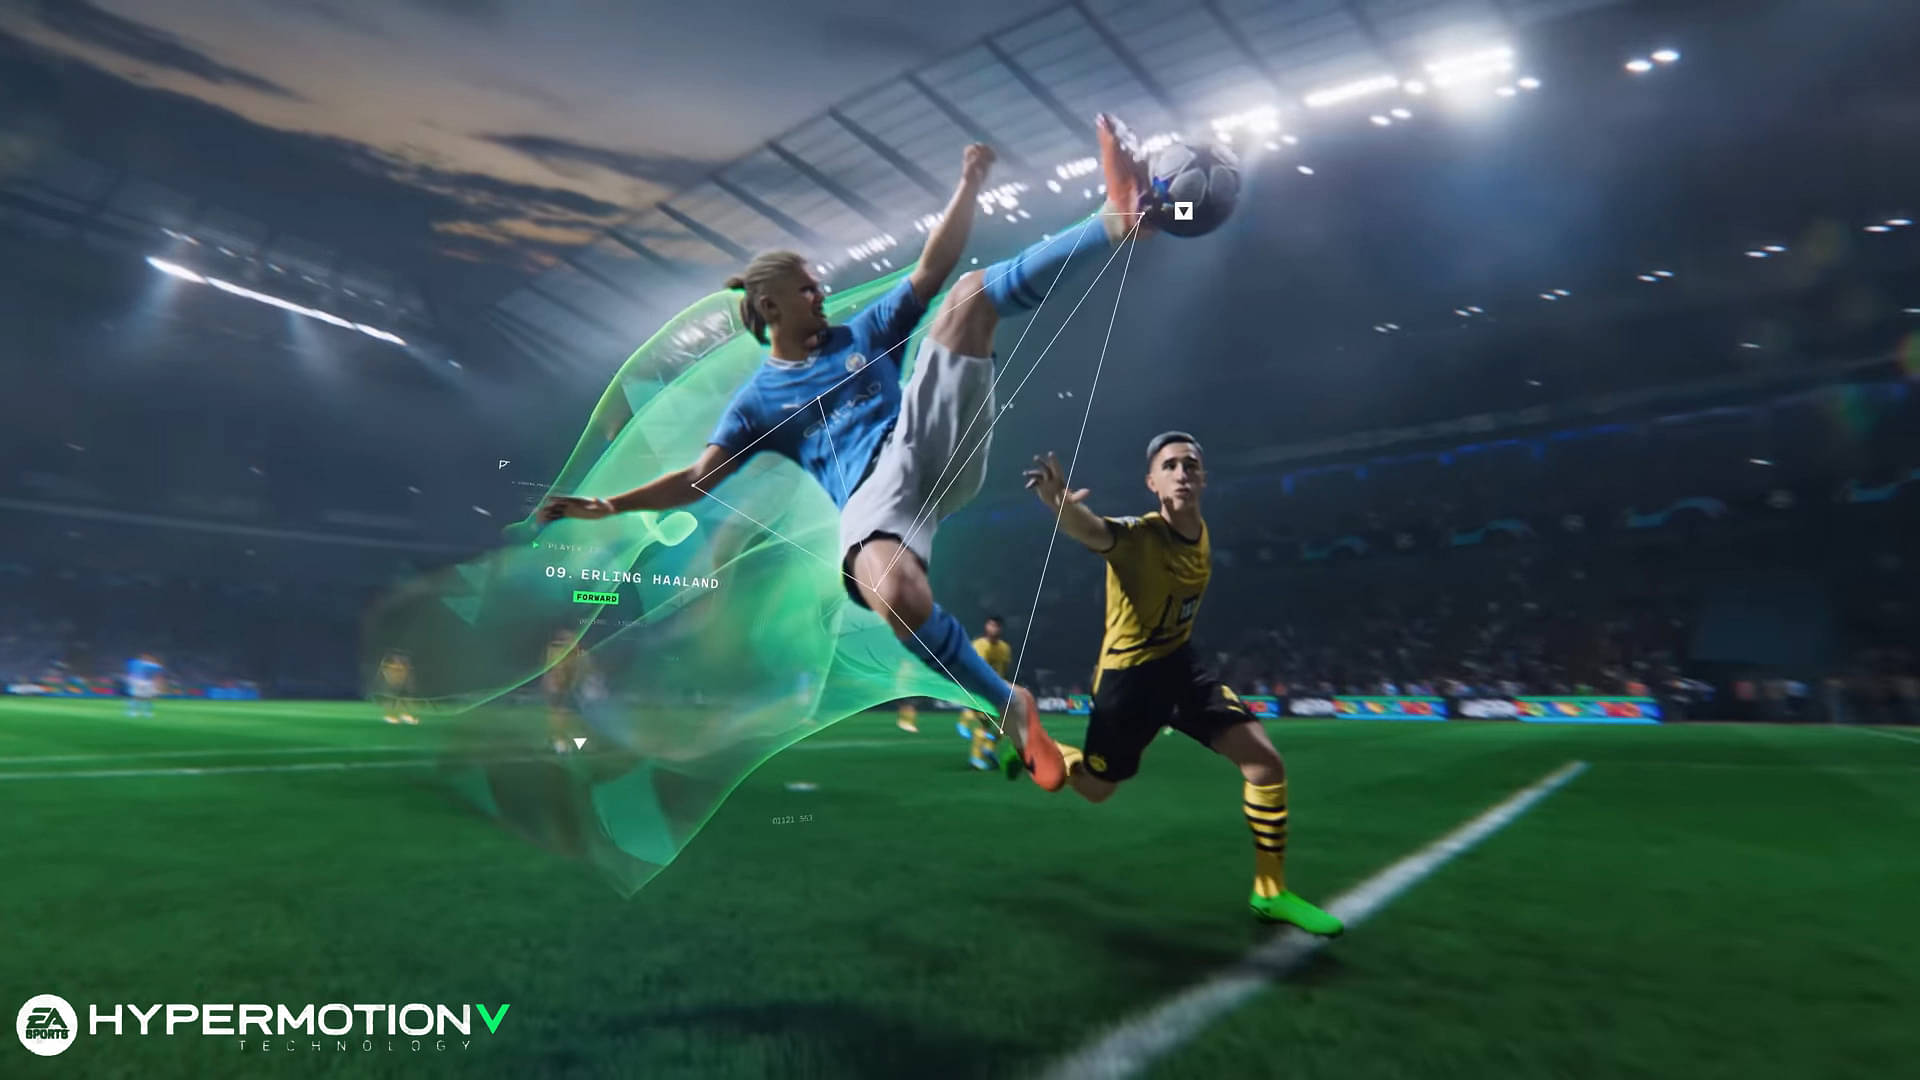 EA SPORTS FC 24  Official Gameplay Deep Dive 